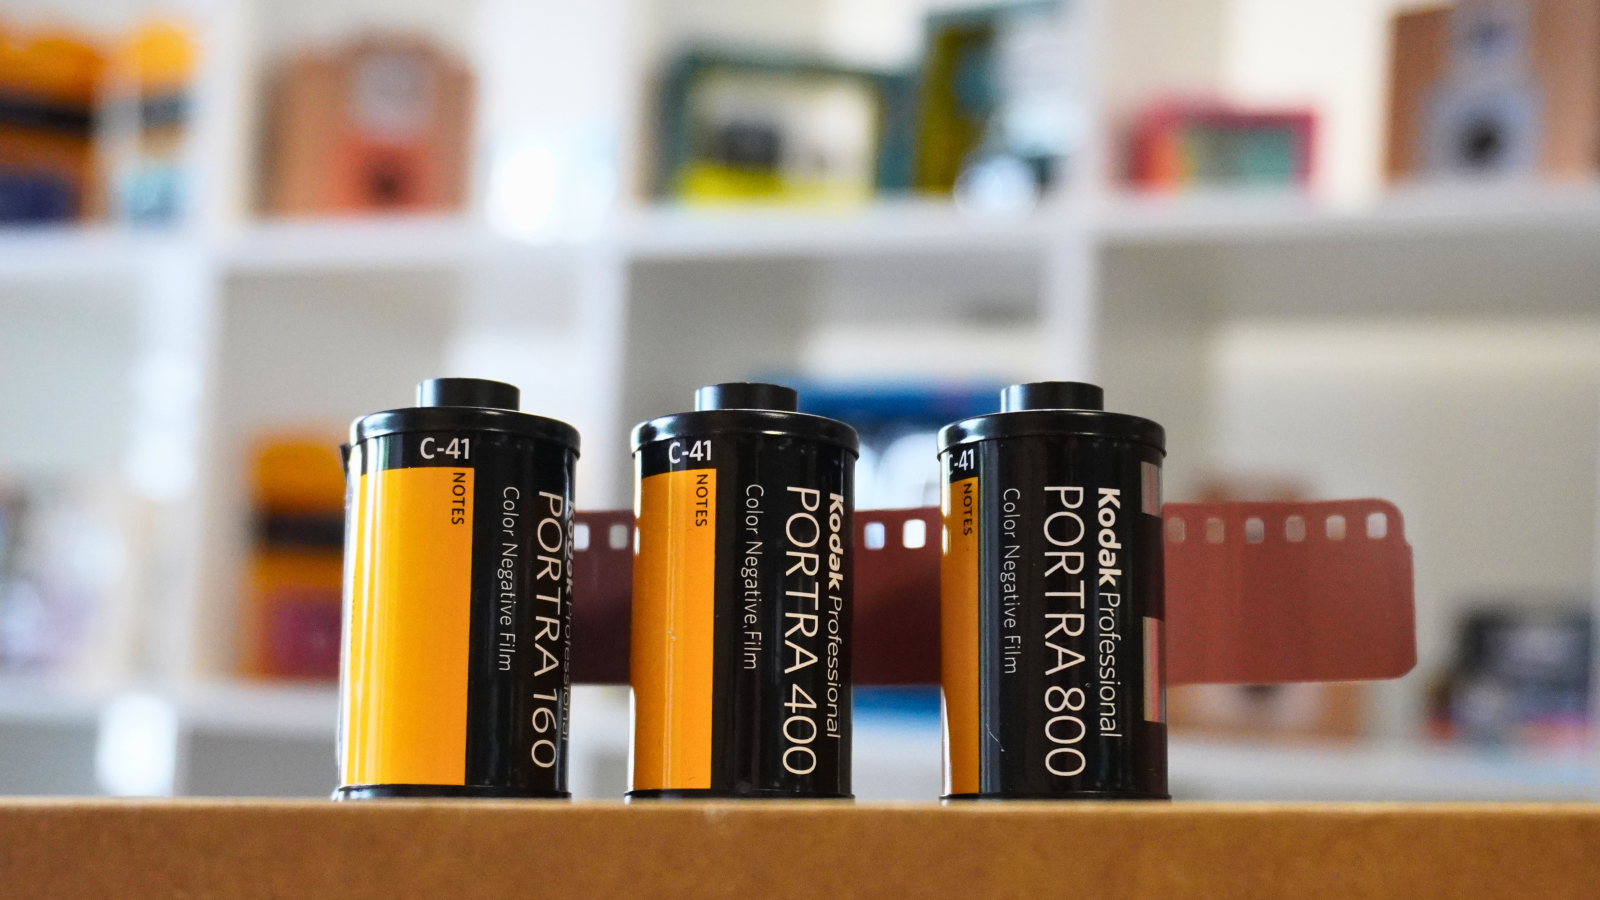 A Behind-the-Scenes Look At How 35mm Film is Developed and Printed at a Lab